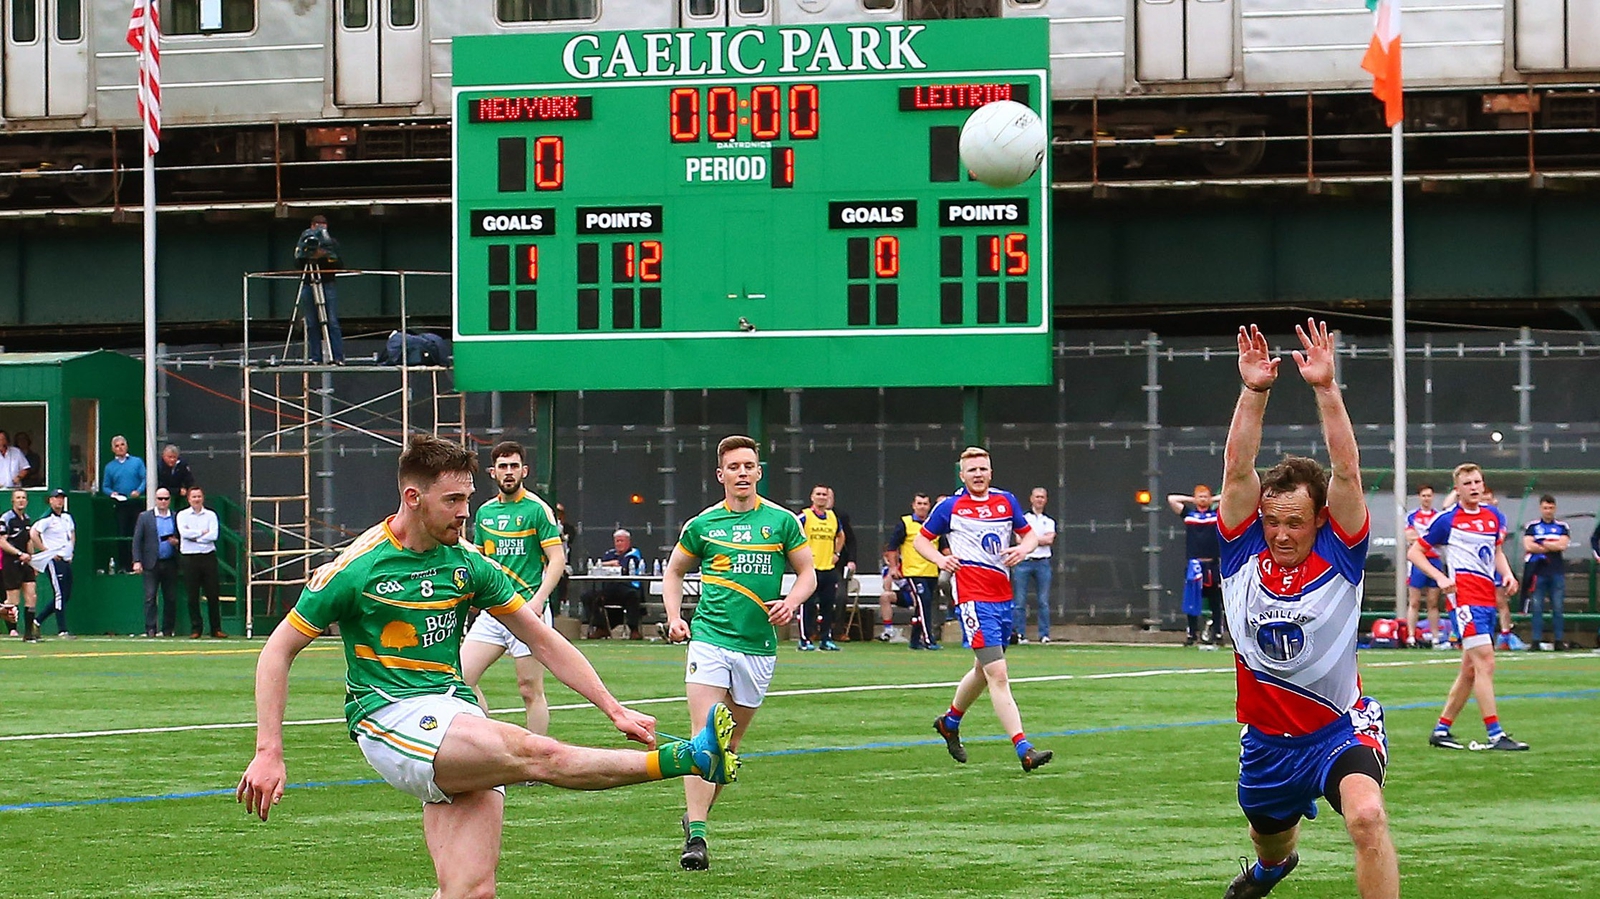 Watch highlights of Leitrim's win over New York